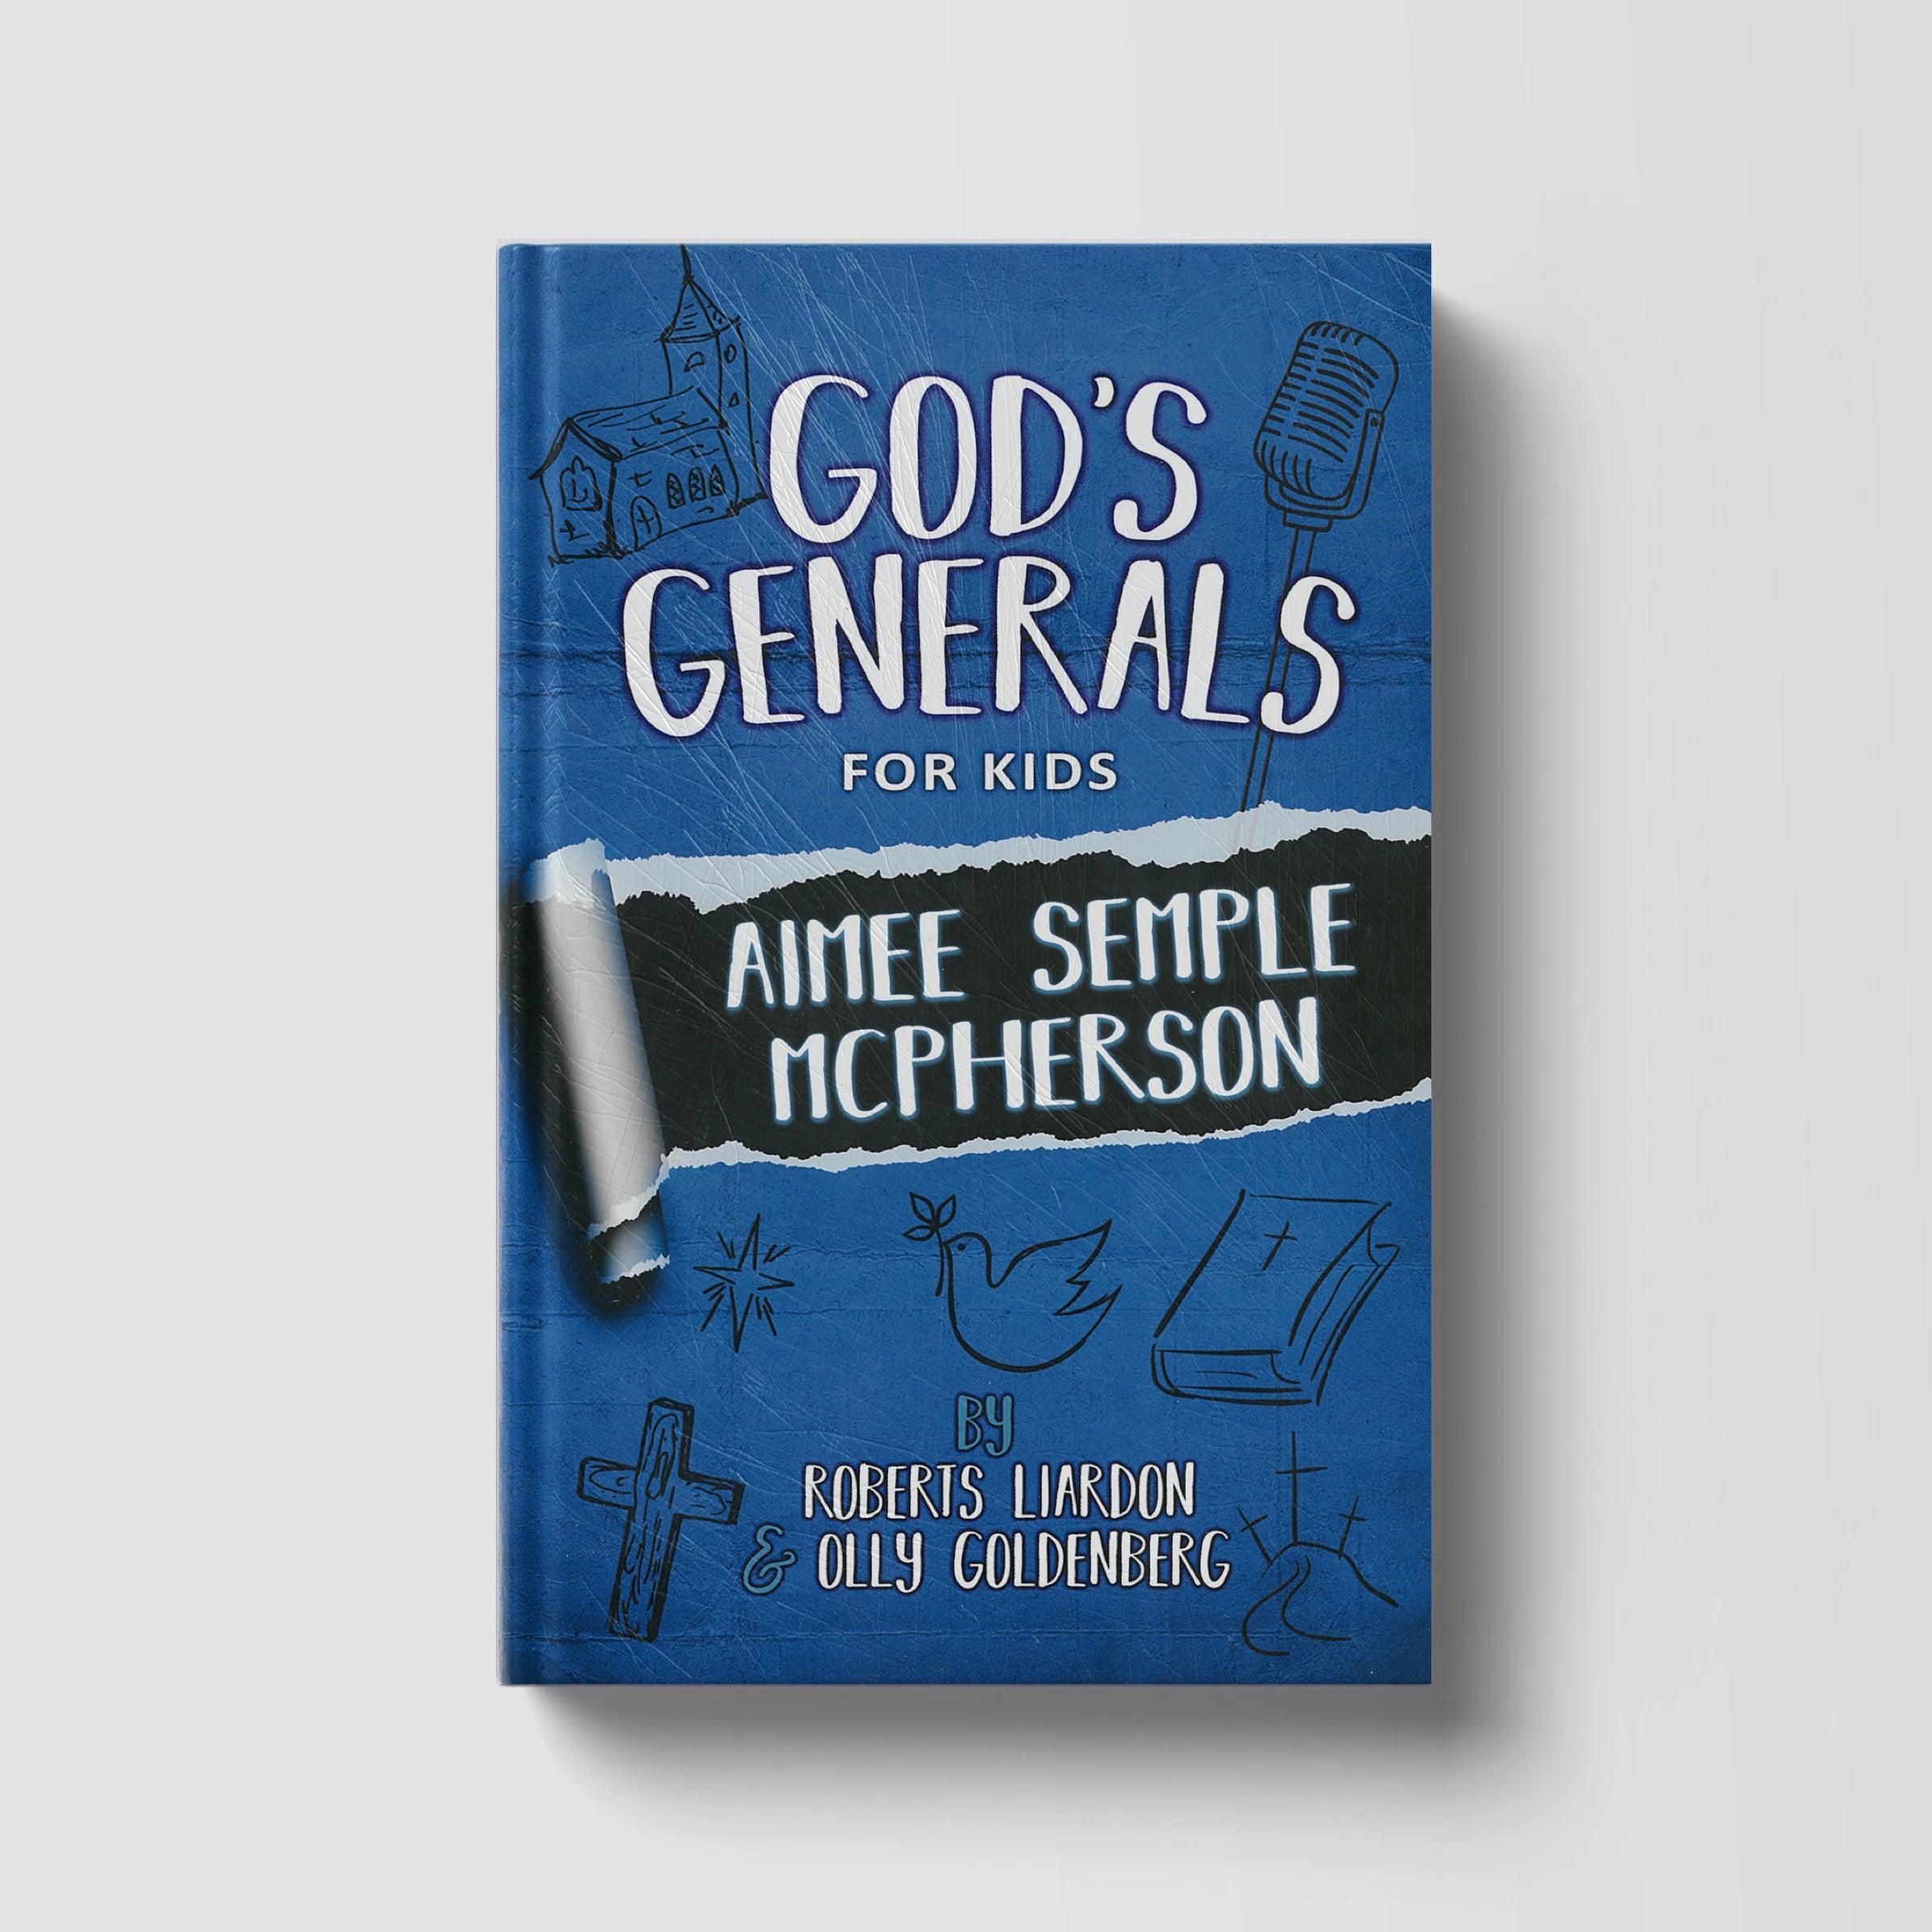 God's Generals For Kids: Aimee Semple McPherson Volume 9